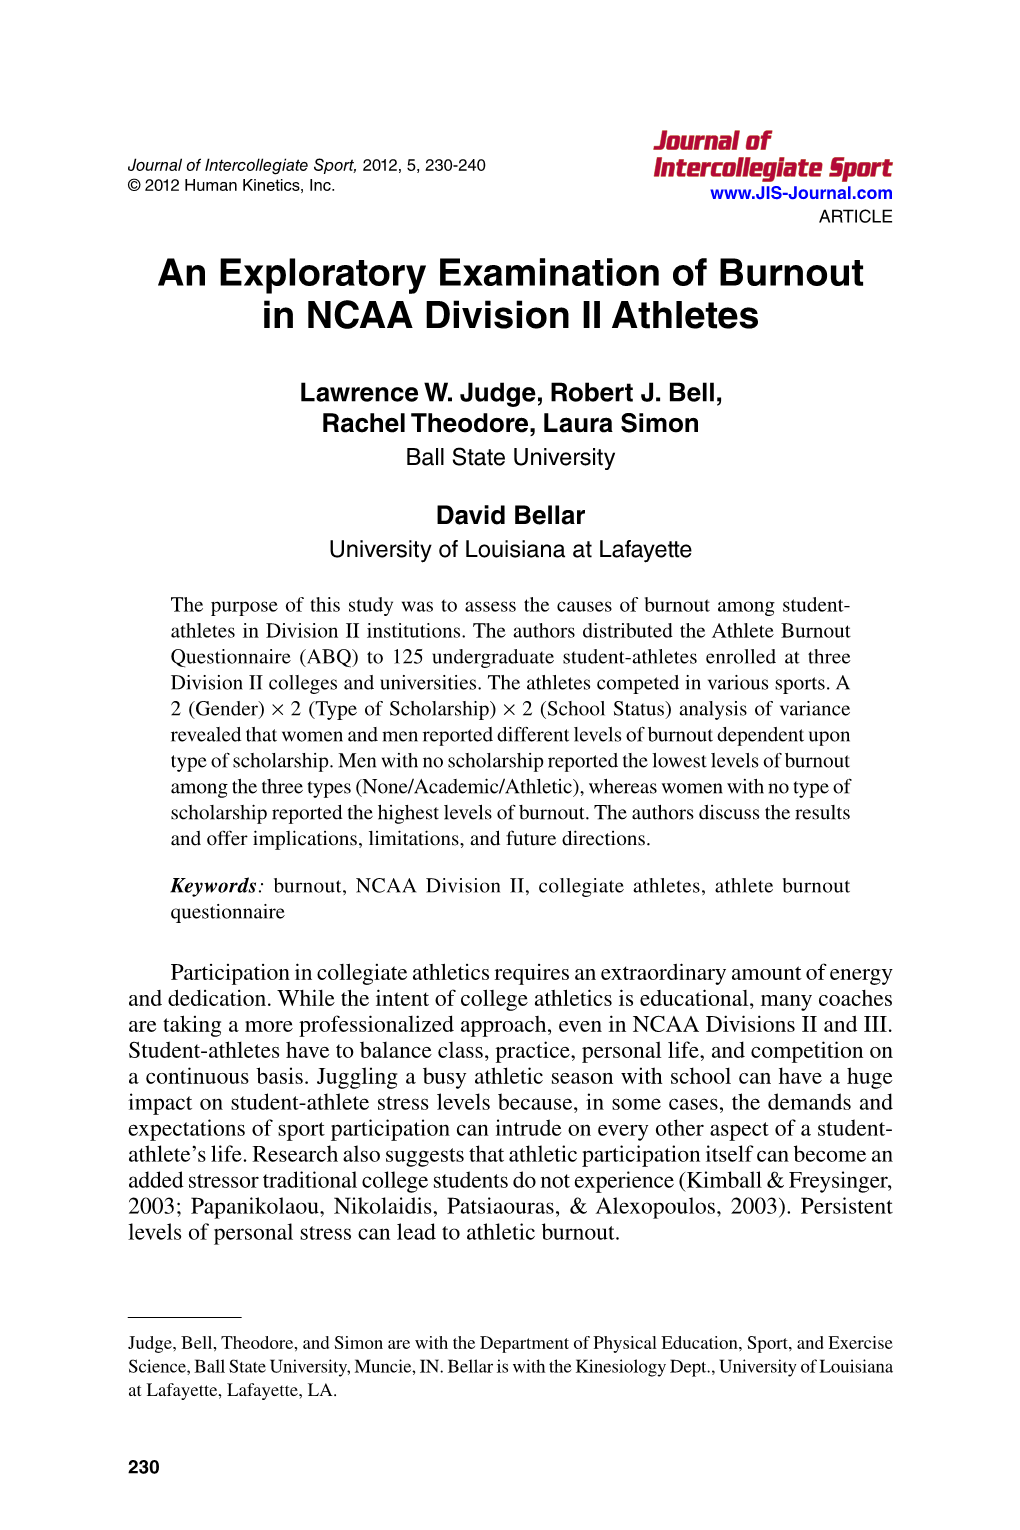 An Exploratory Examination of Burnout in NCAA Division II Athletes